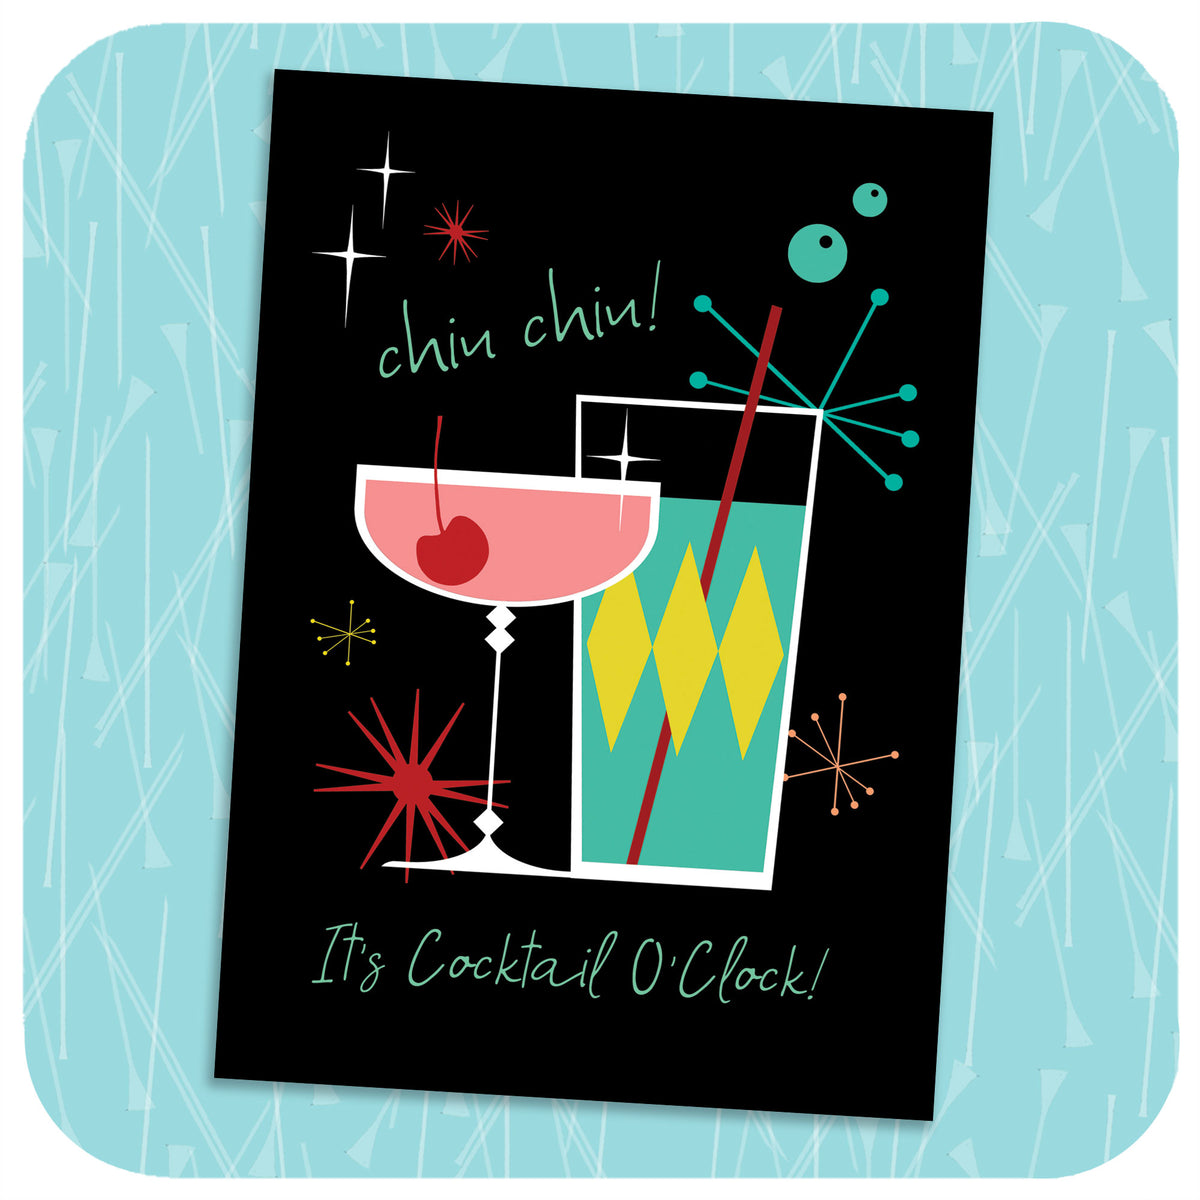 Chin Chin! It's Cocktail O'Clock Greetings Card on a turquoise background | The Inkabilly Emporium